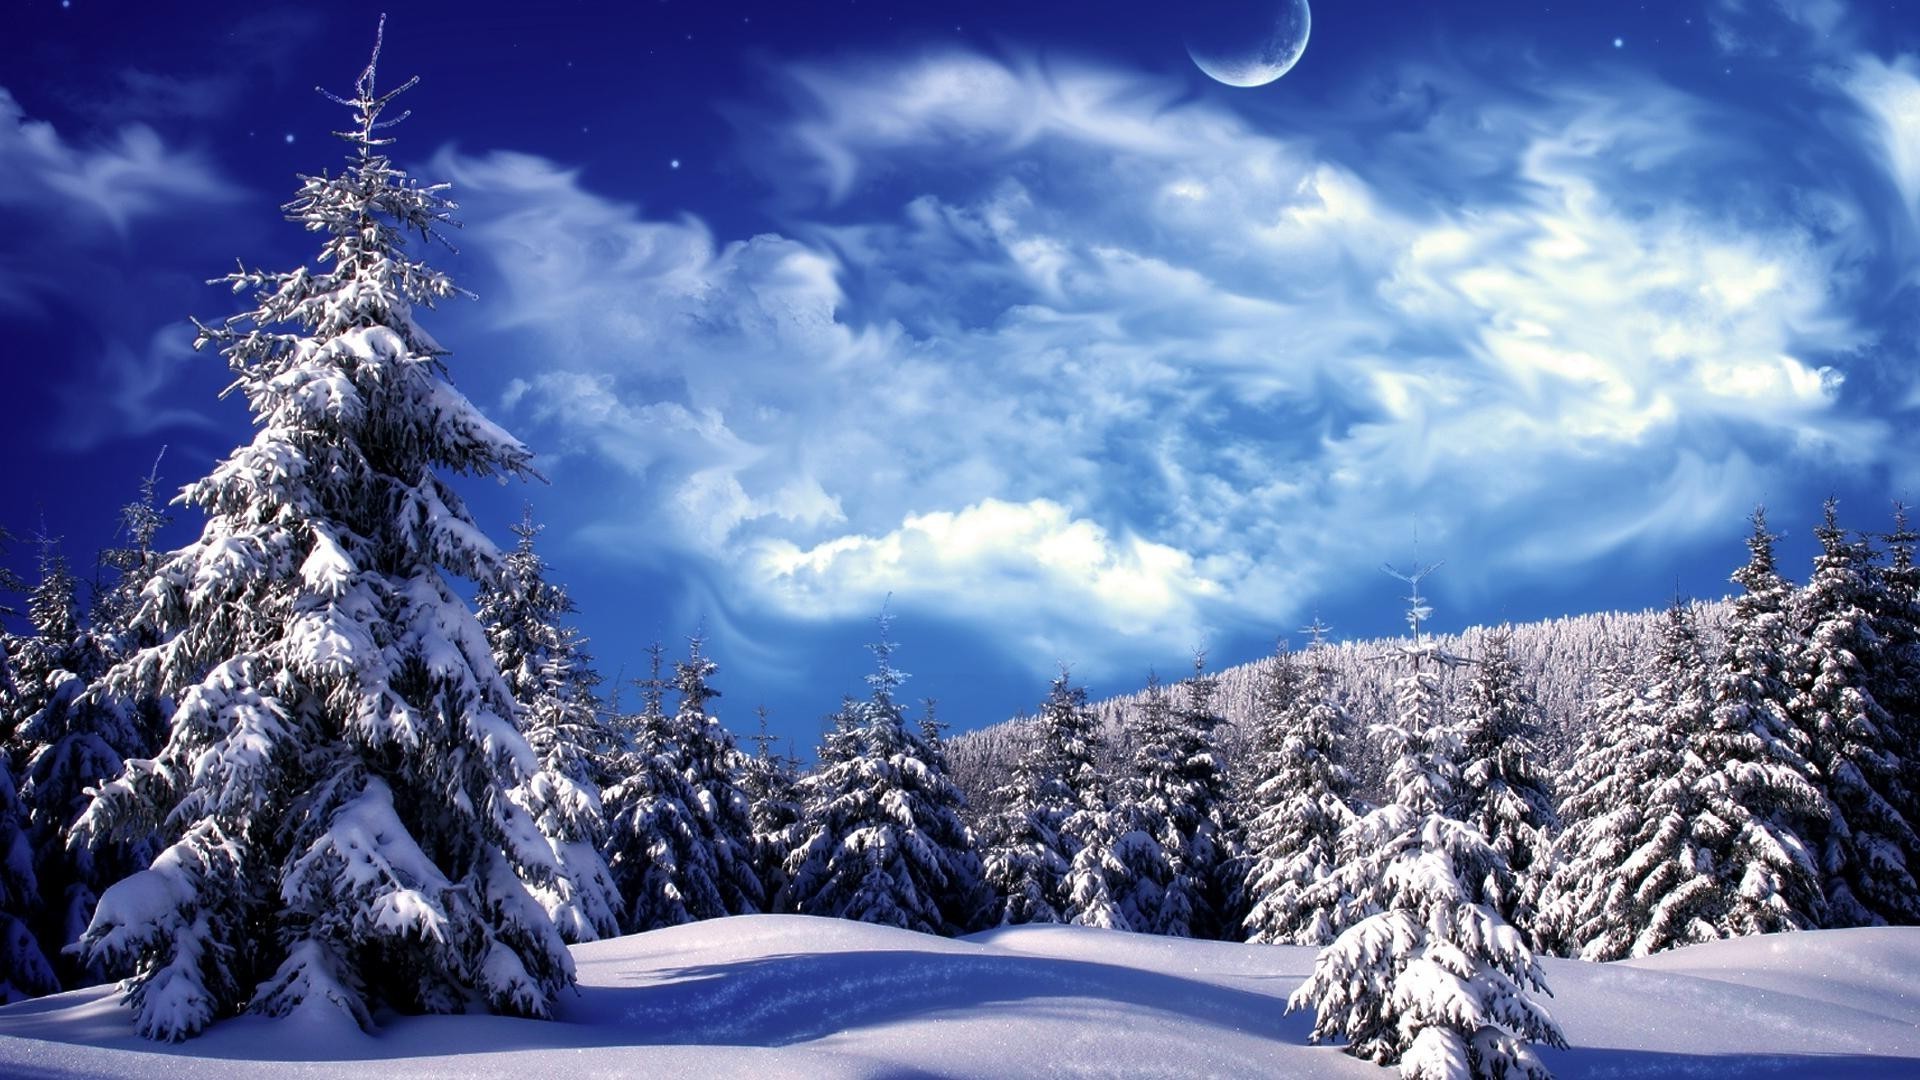 winter snow cold mountain wood frost season landscape scenic tree frozen ice fir sky weather christmas fair weather hill nature